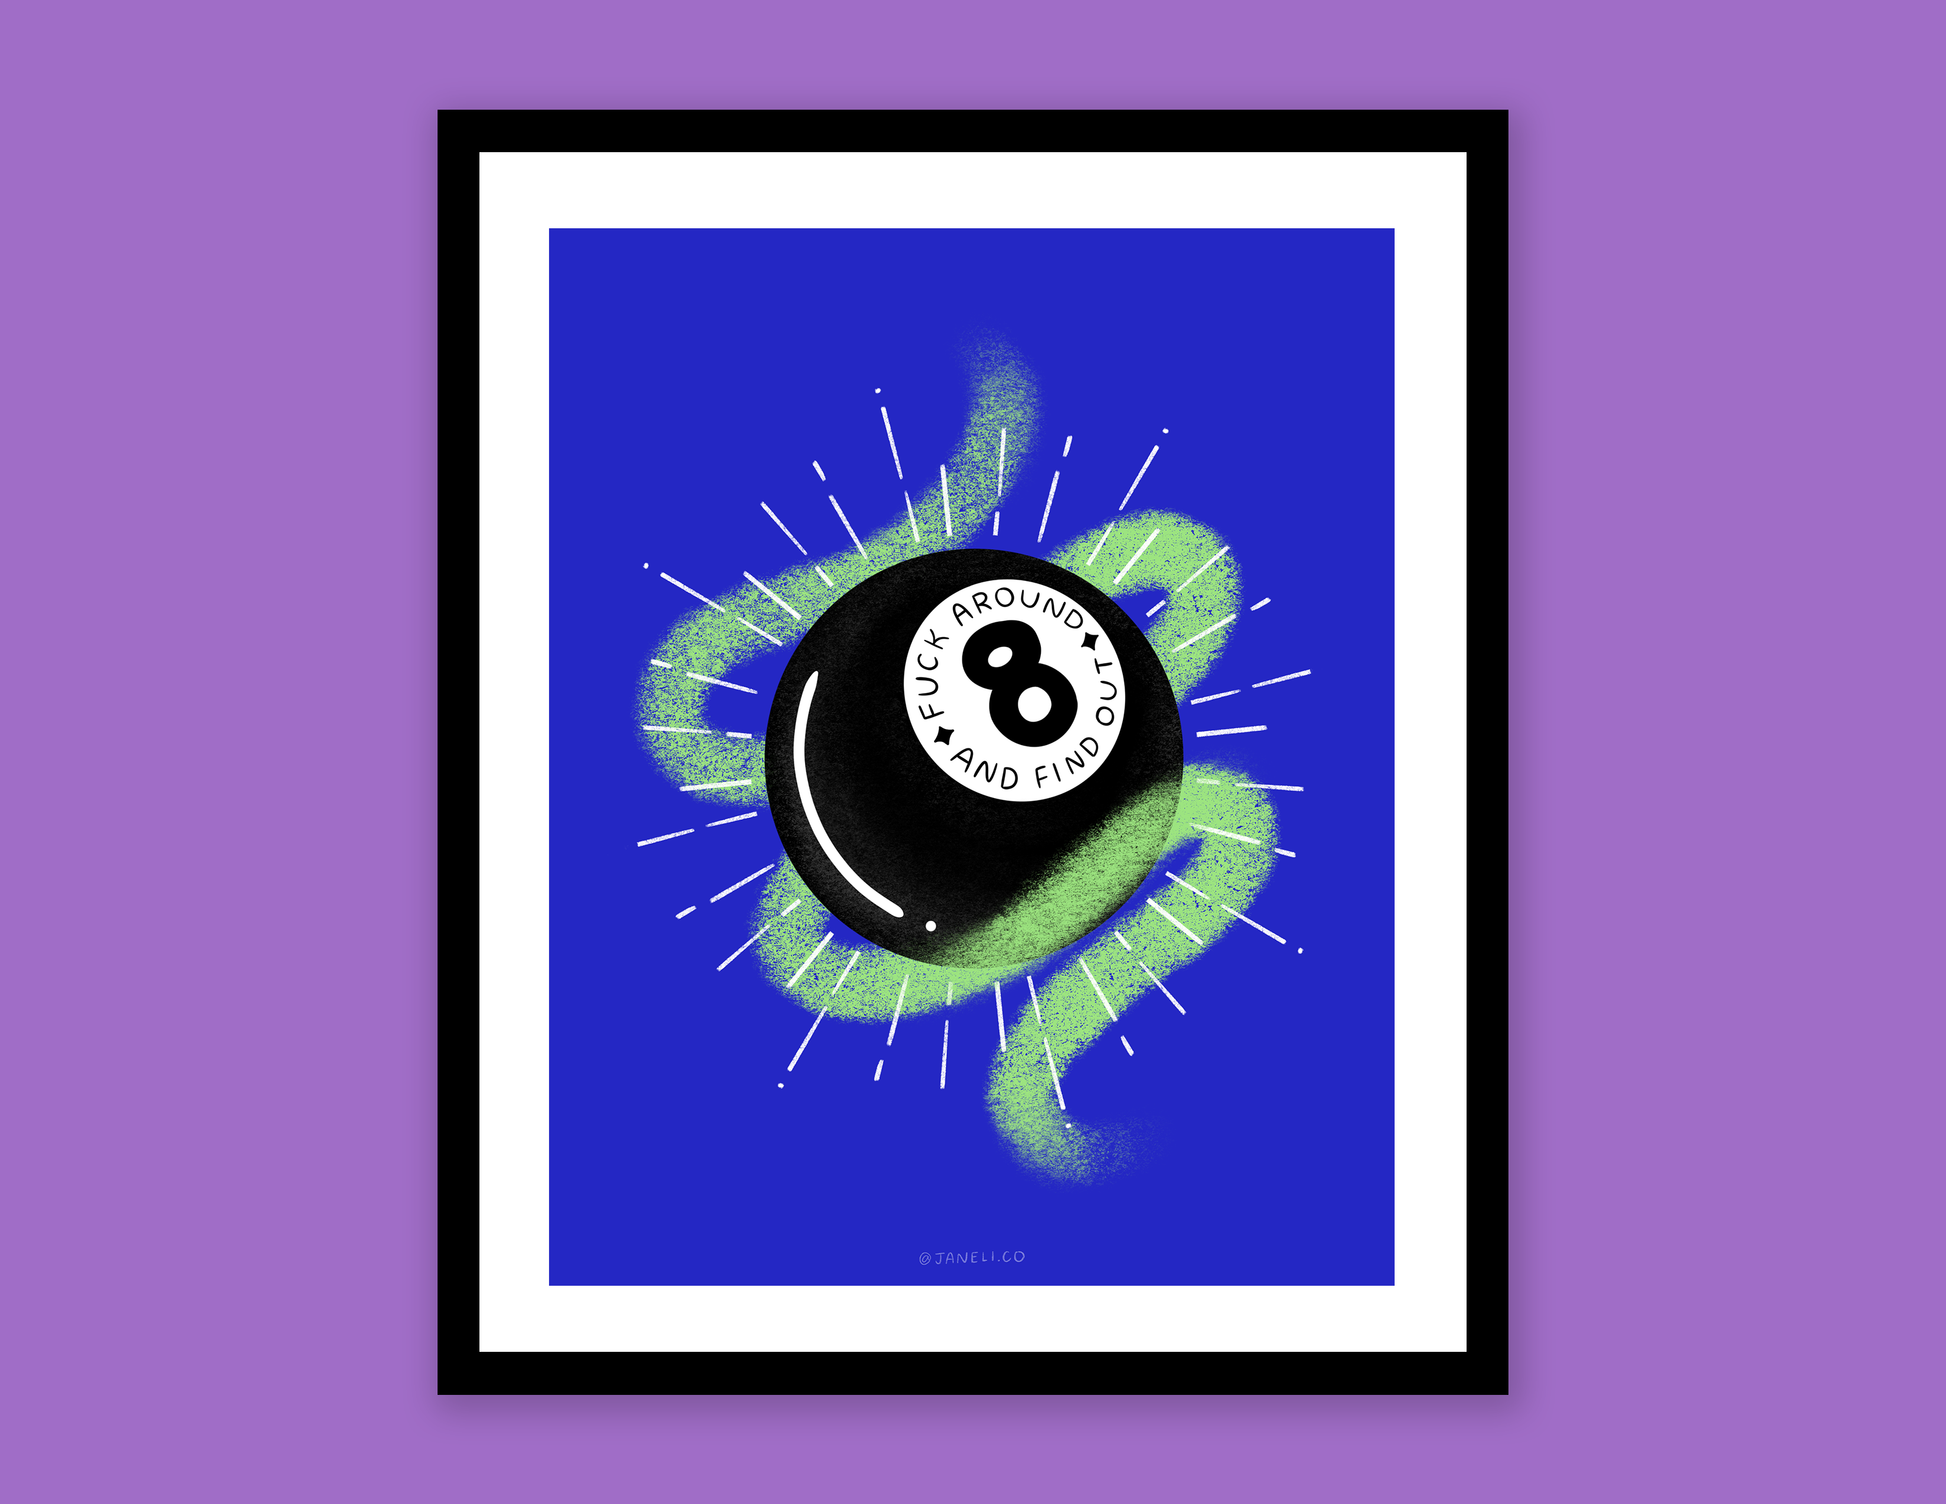 A digital mock of a framed JaneLi.Co print that says "Fuck Around and Find Out" on a magic 8 ball over a purple background.